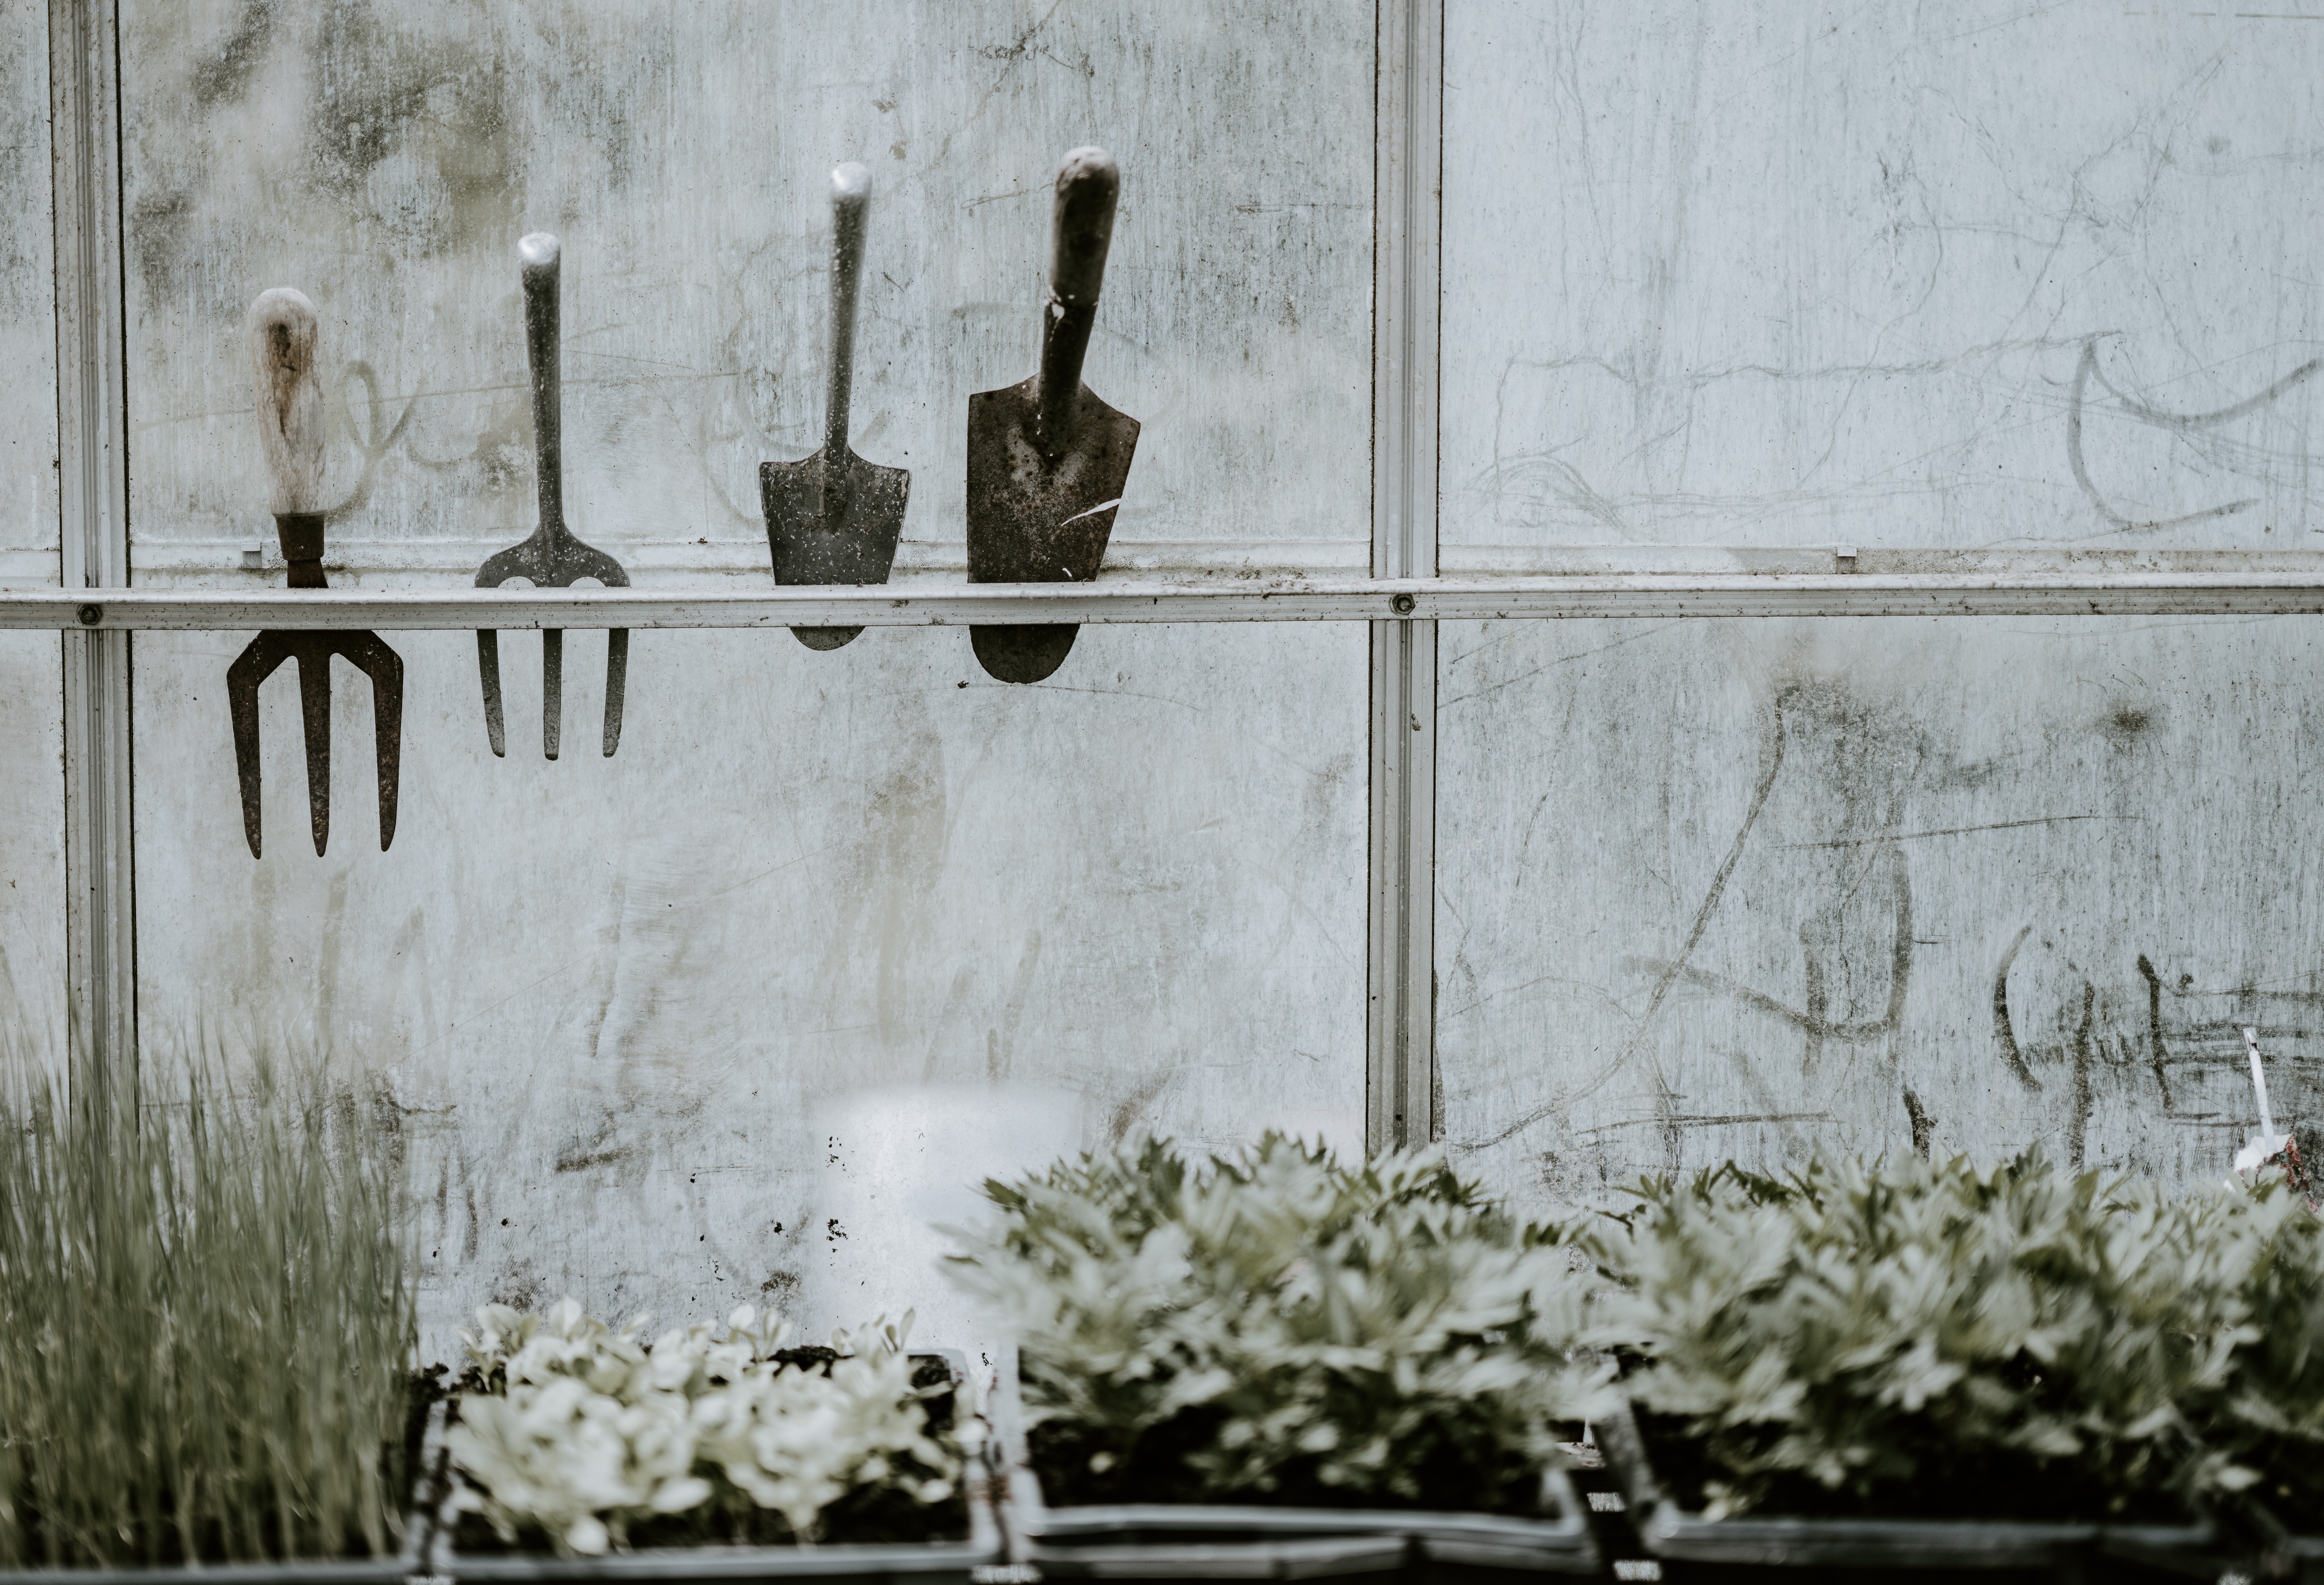 Photo of gardening tools hanging in a window over some plants, presumably in a greenhouse or gardening shed